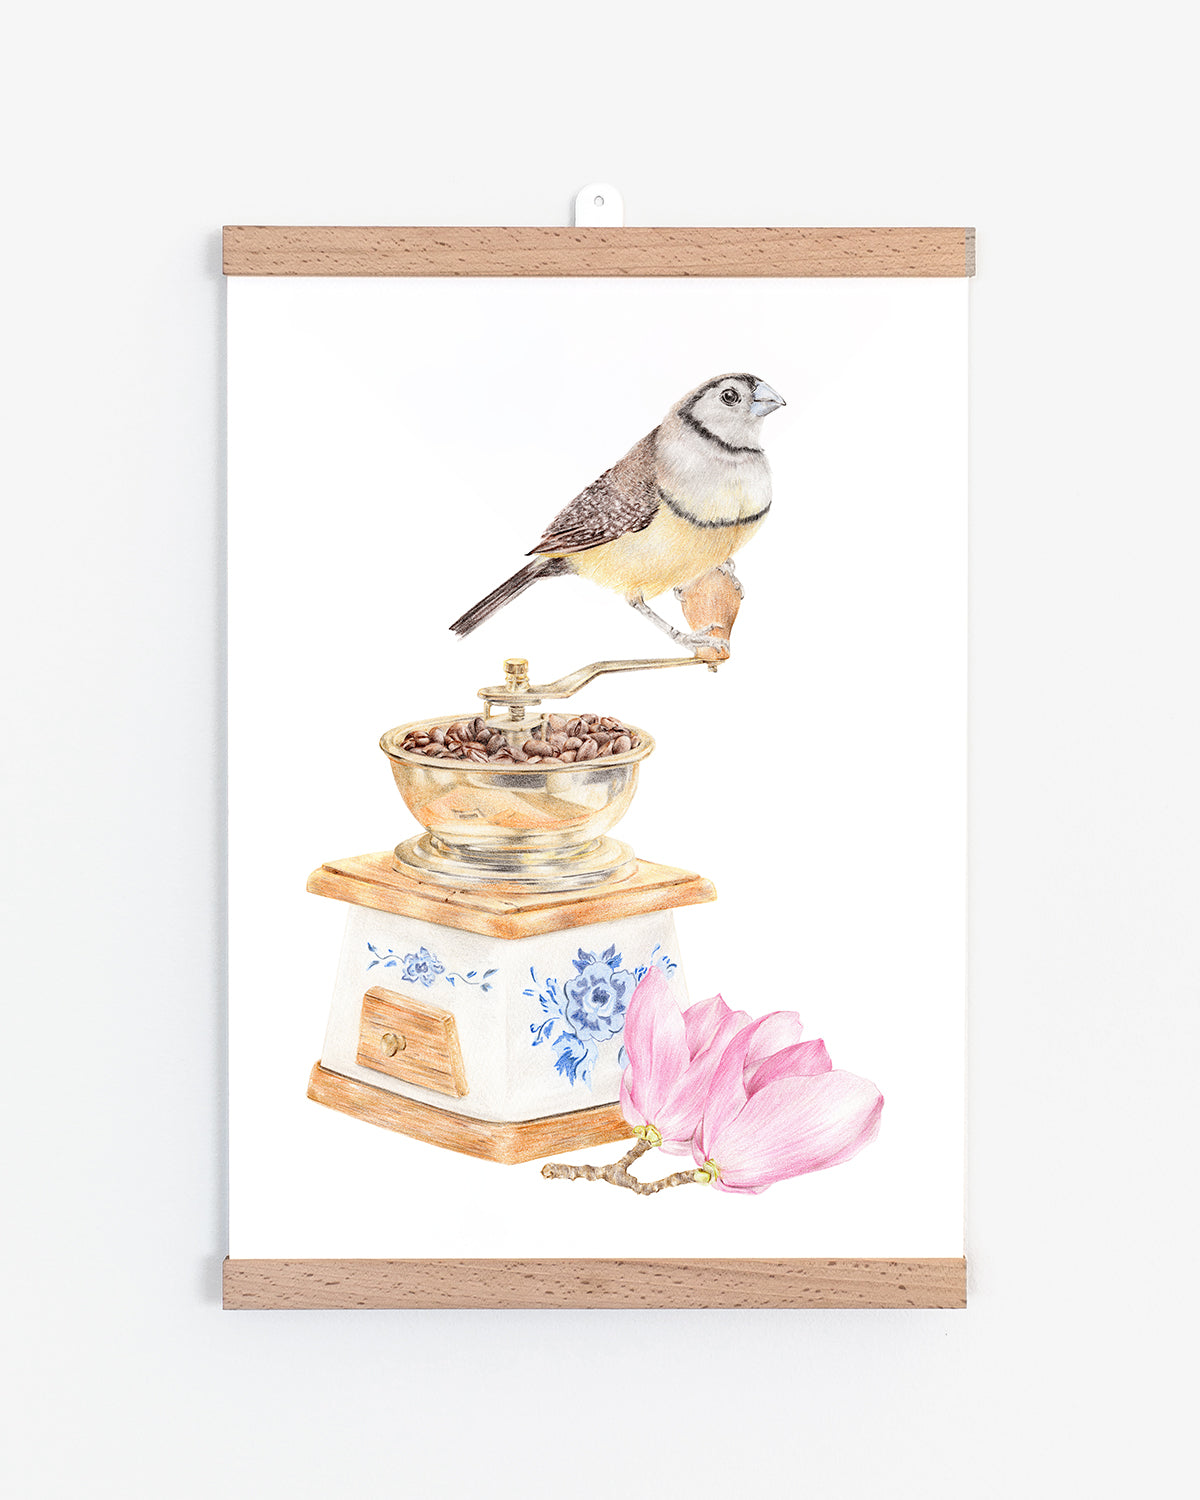 Double barred finch with a magnolia